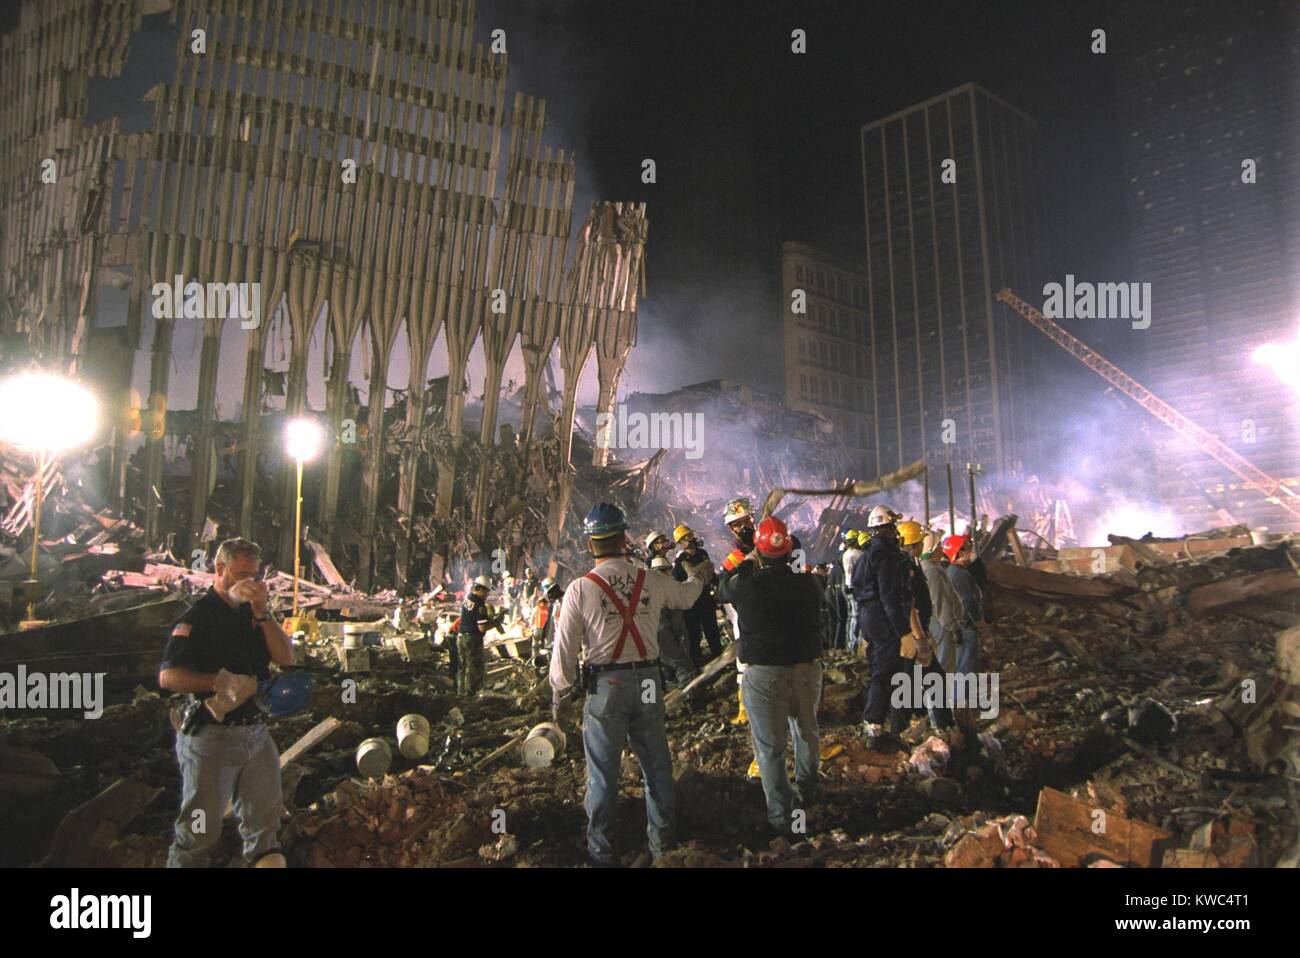 On the south west area of Ground Zero a bucket line removes debris at night, Sept 17, 2001. At left a section of WTC 1, the North Tower still stands. World Trade Center, New York City, after September 11, 2001 terrorist attacks. (BSLOC 2015 2 92) Stock Photo